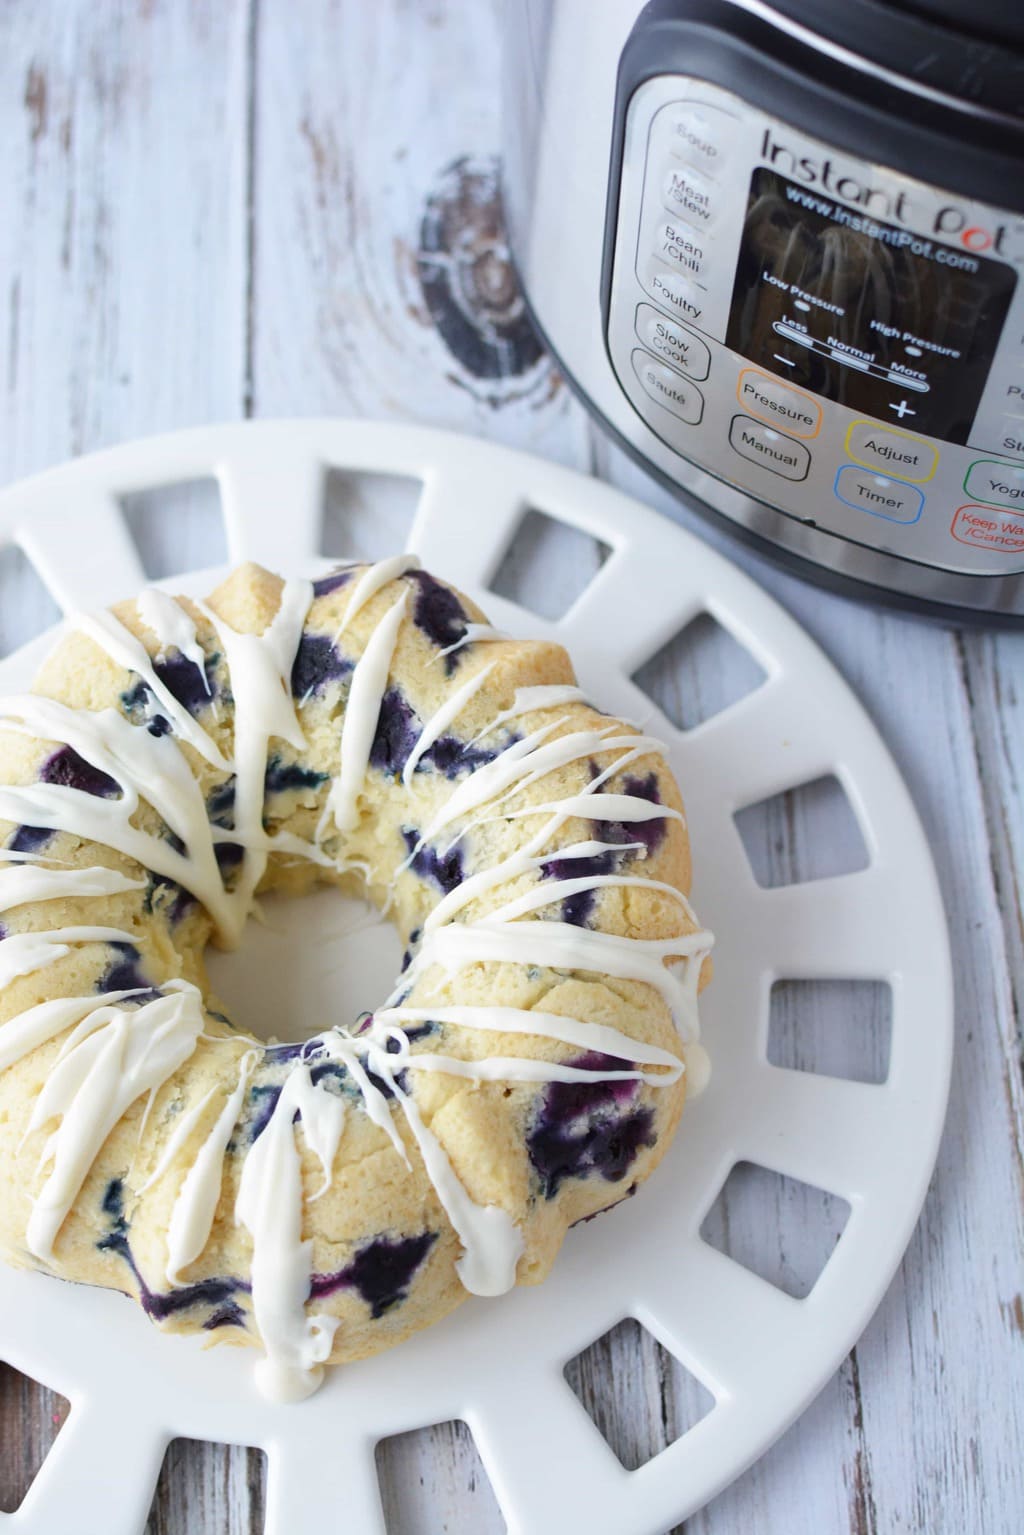 Blueberry Coffee Cake made in the Instant Pot